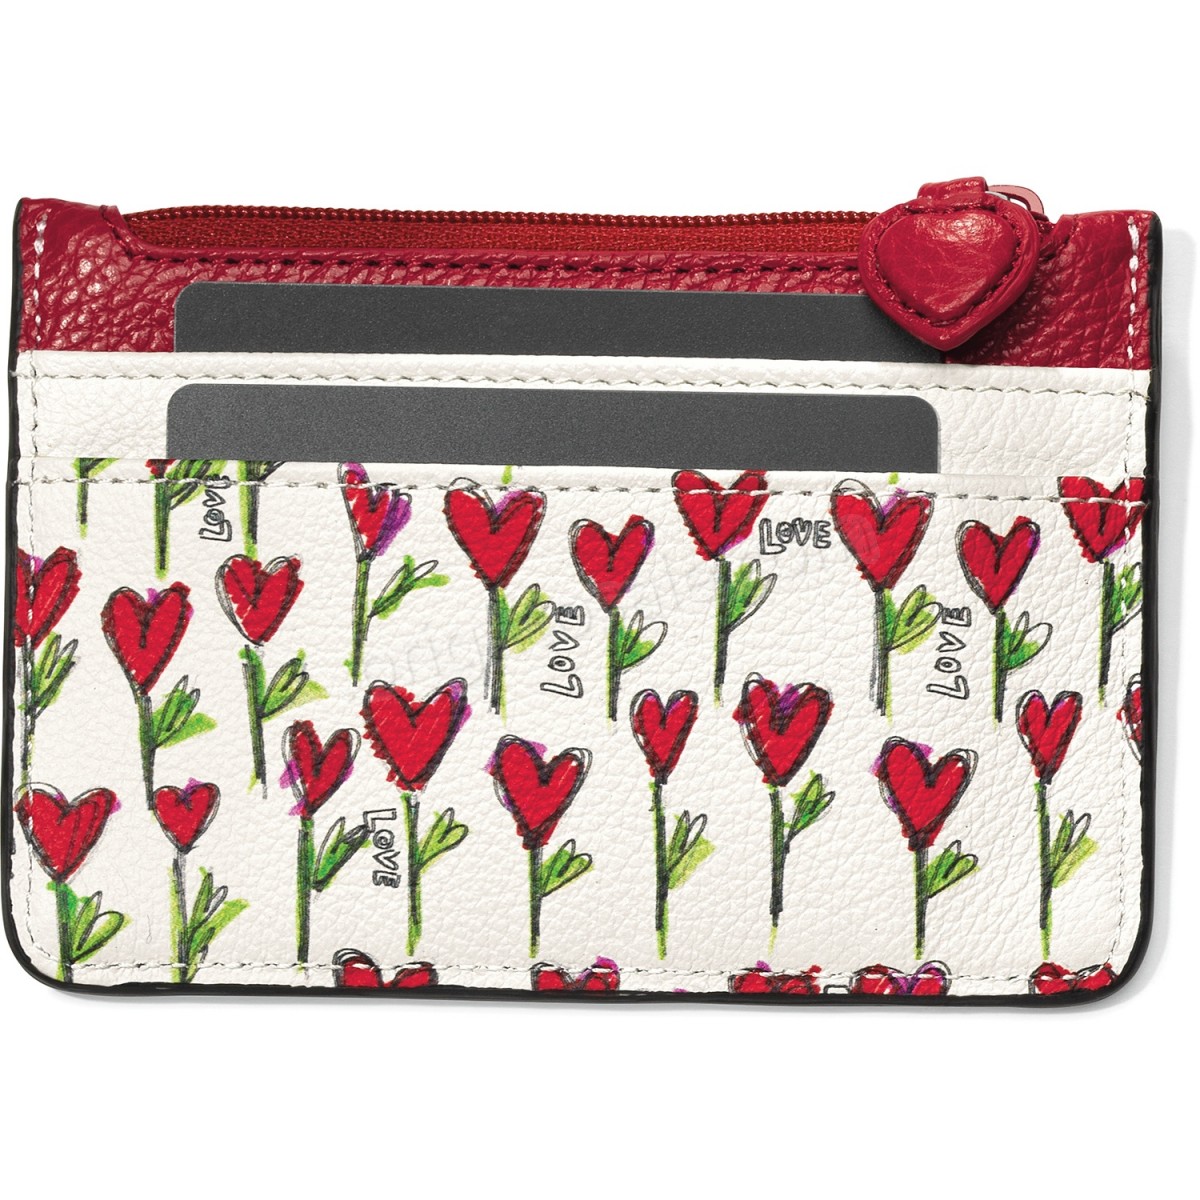 Brighton Collectibles & Online Discount Crazy Love Bright Cross Body Pouch - -2